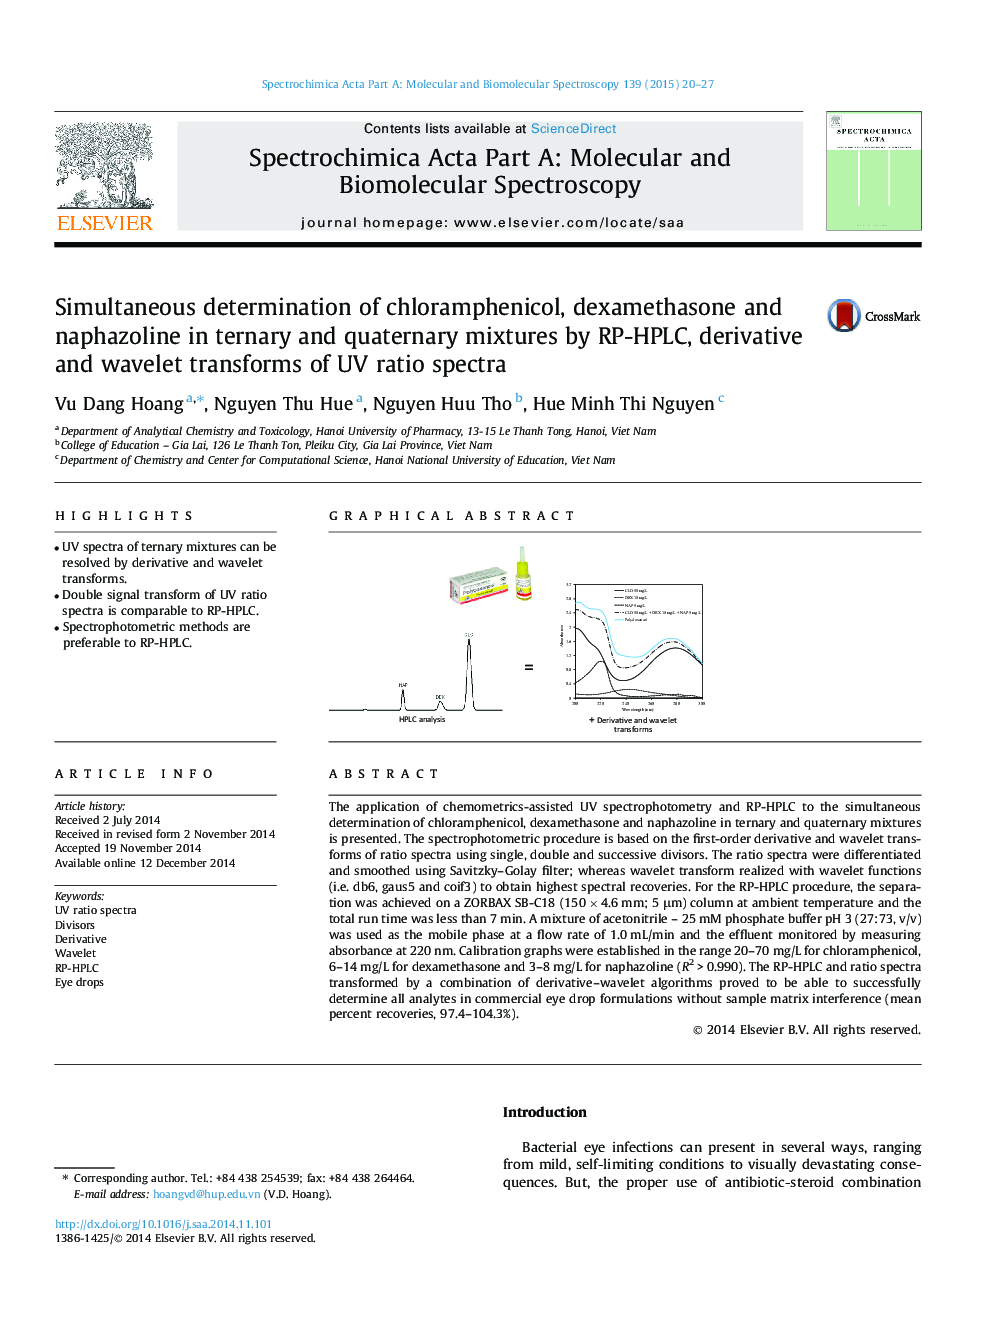 Simultaneous determination of chloramphenicol, dexamethasone and naphazoline in ternary and quaternary mixtures by RP-HPLC, derivative and wavelet transforms of UV ratio spectra